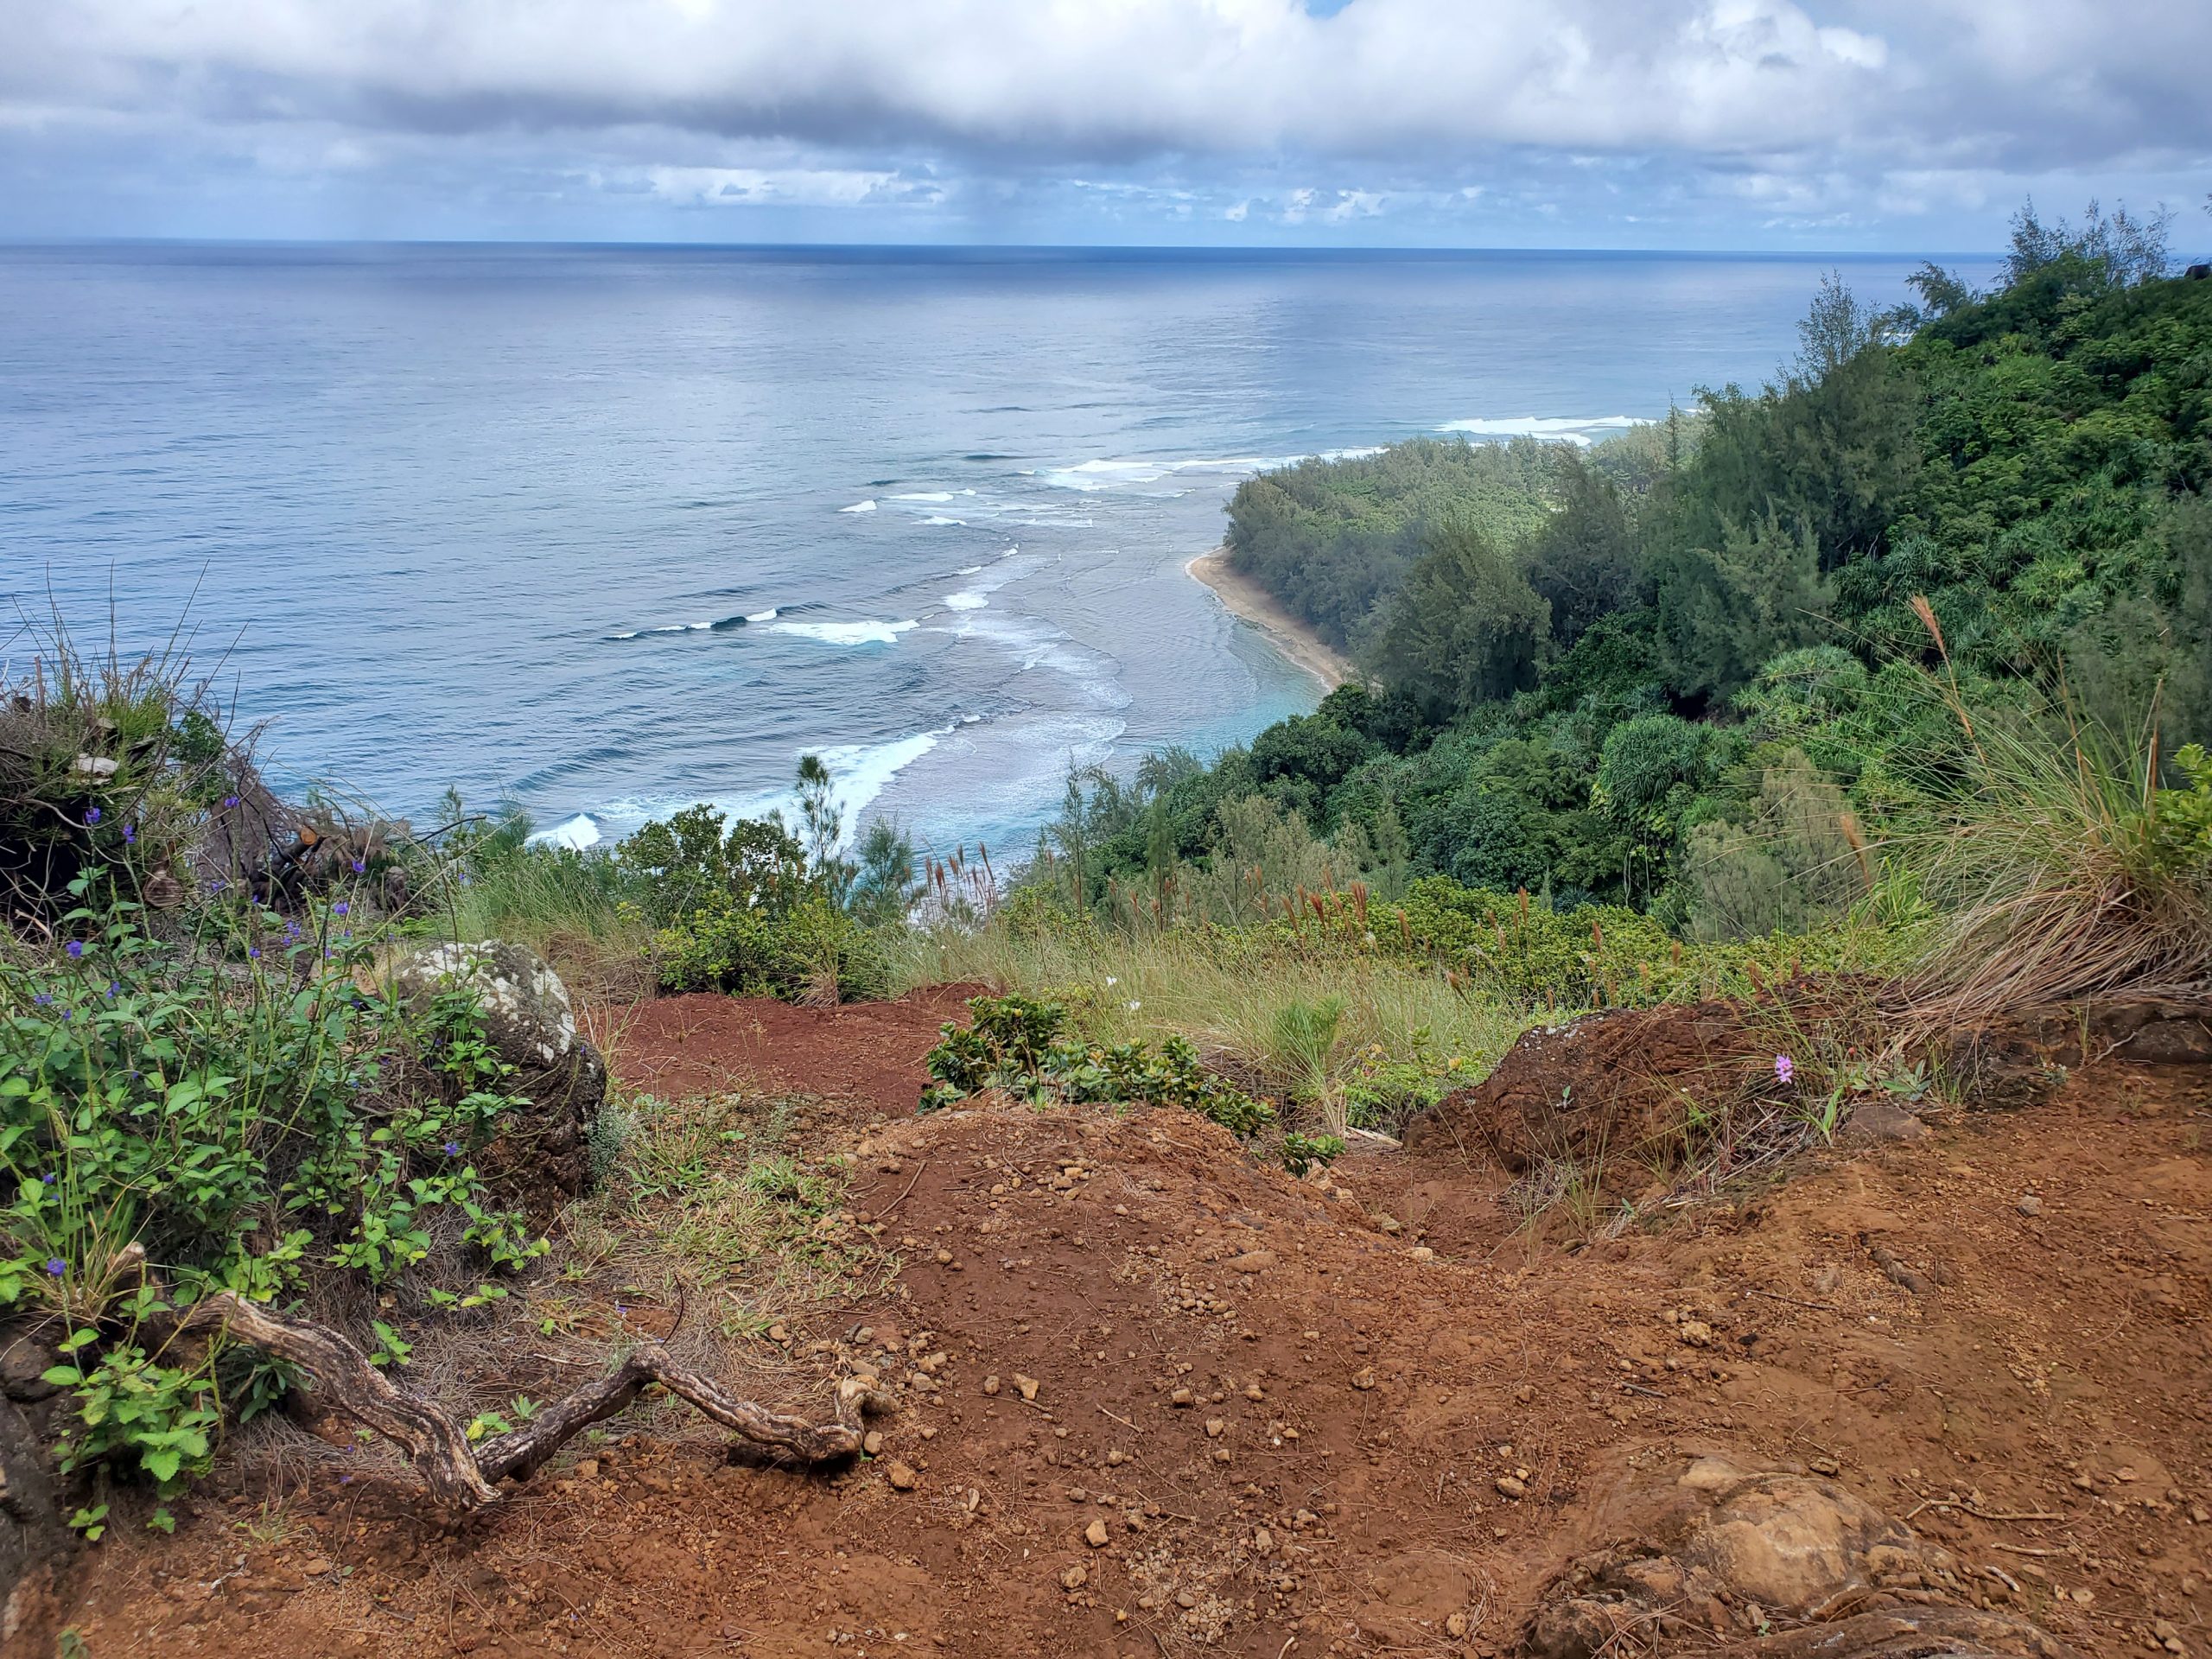 View of the Napali Coast from the Kalalau Trail